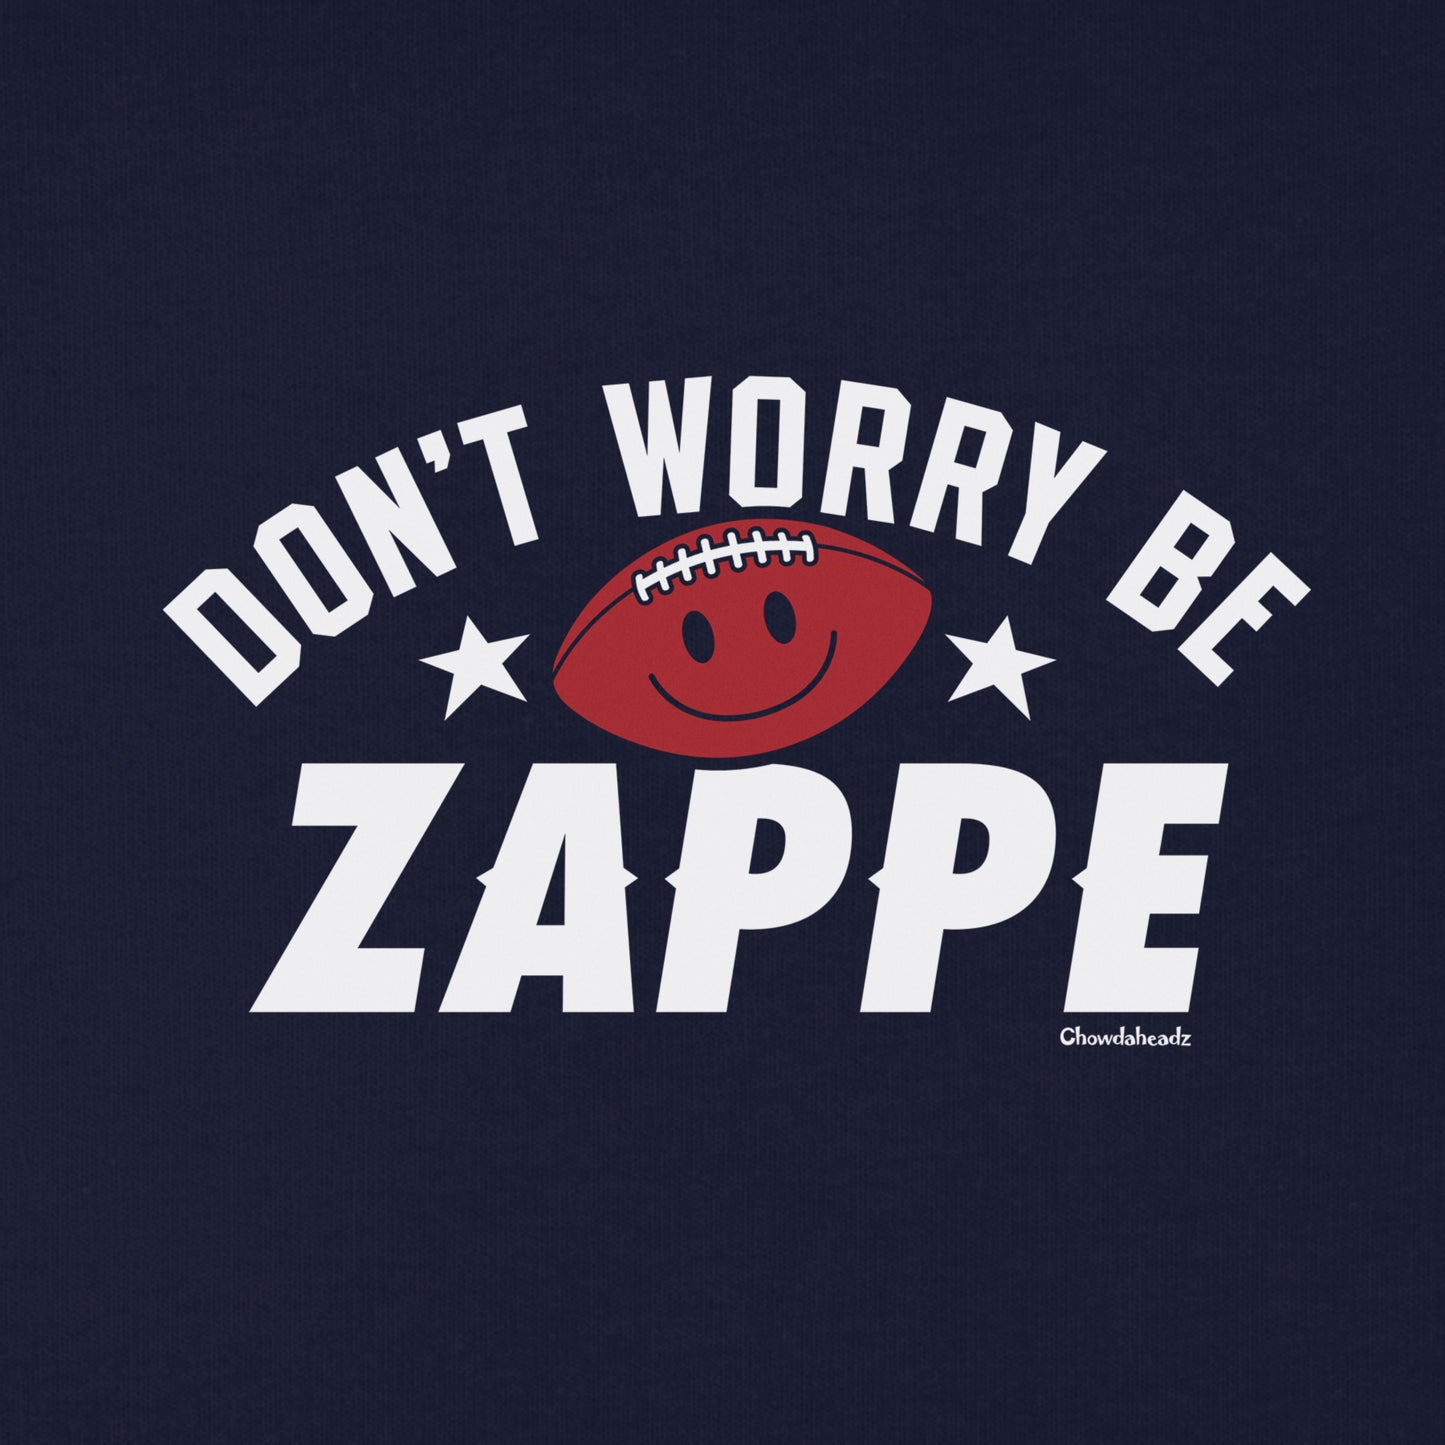 Don't Worry Be Zappe Youth T-Shirt - Chowdaheadz